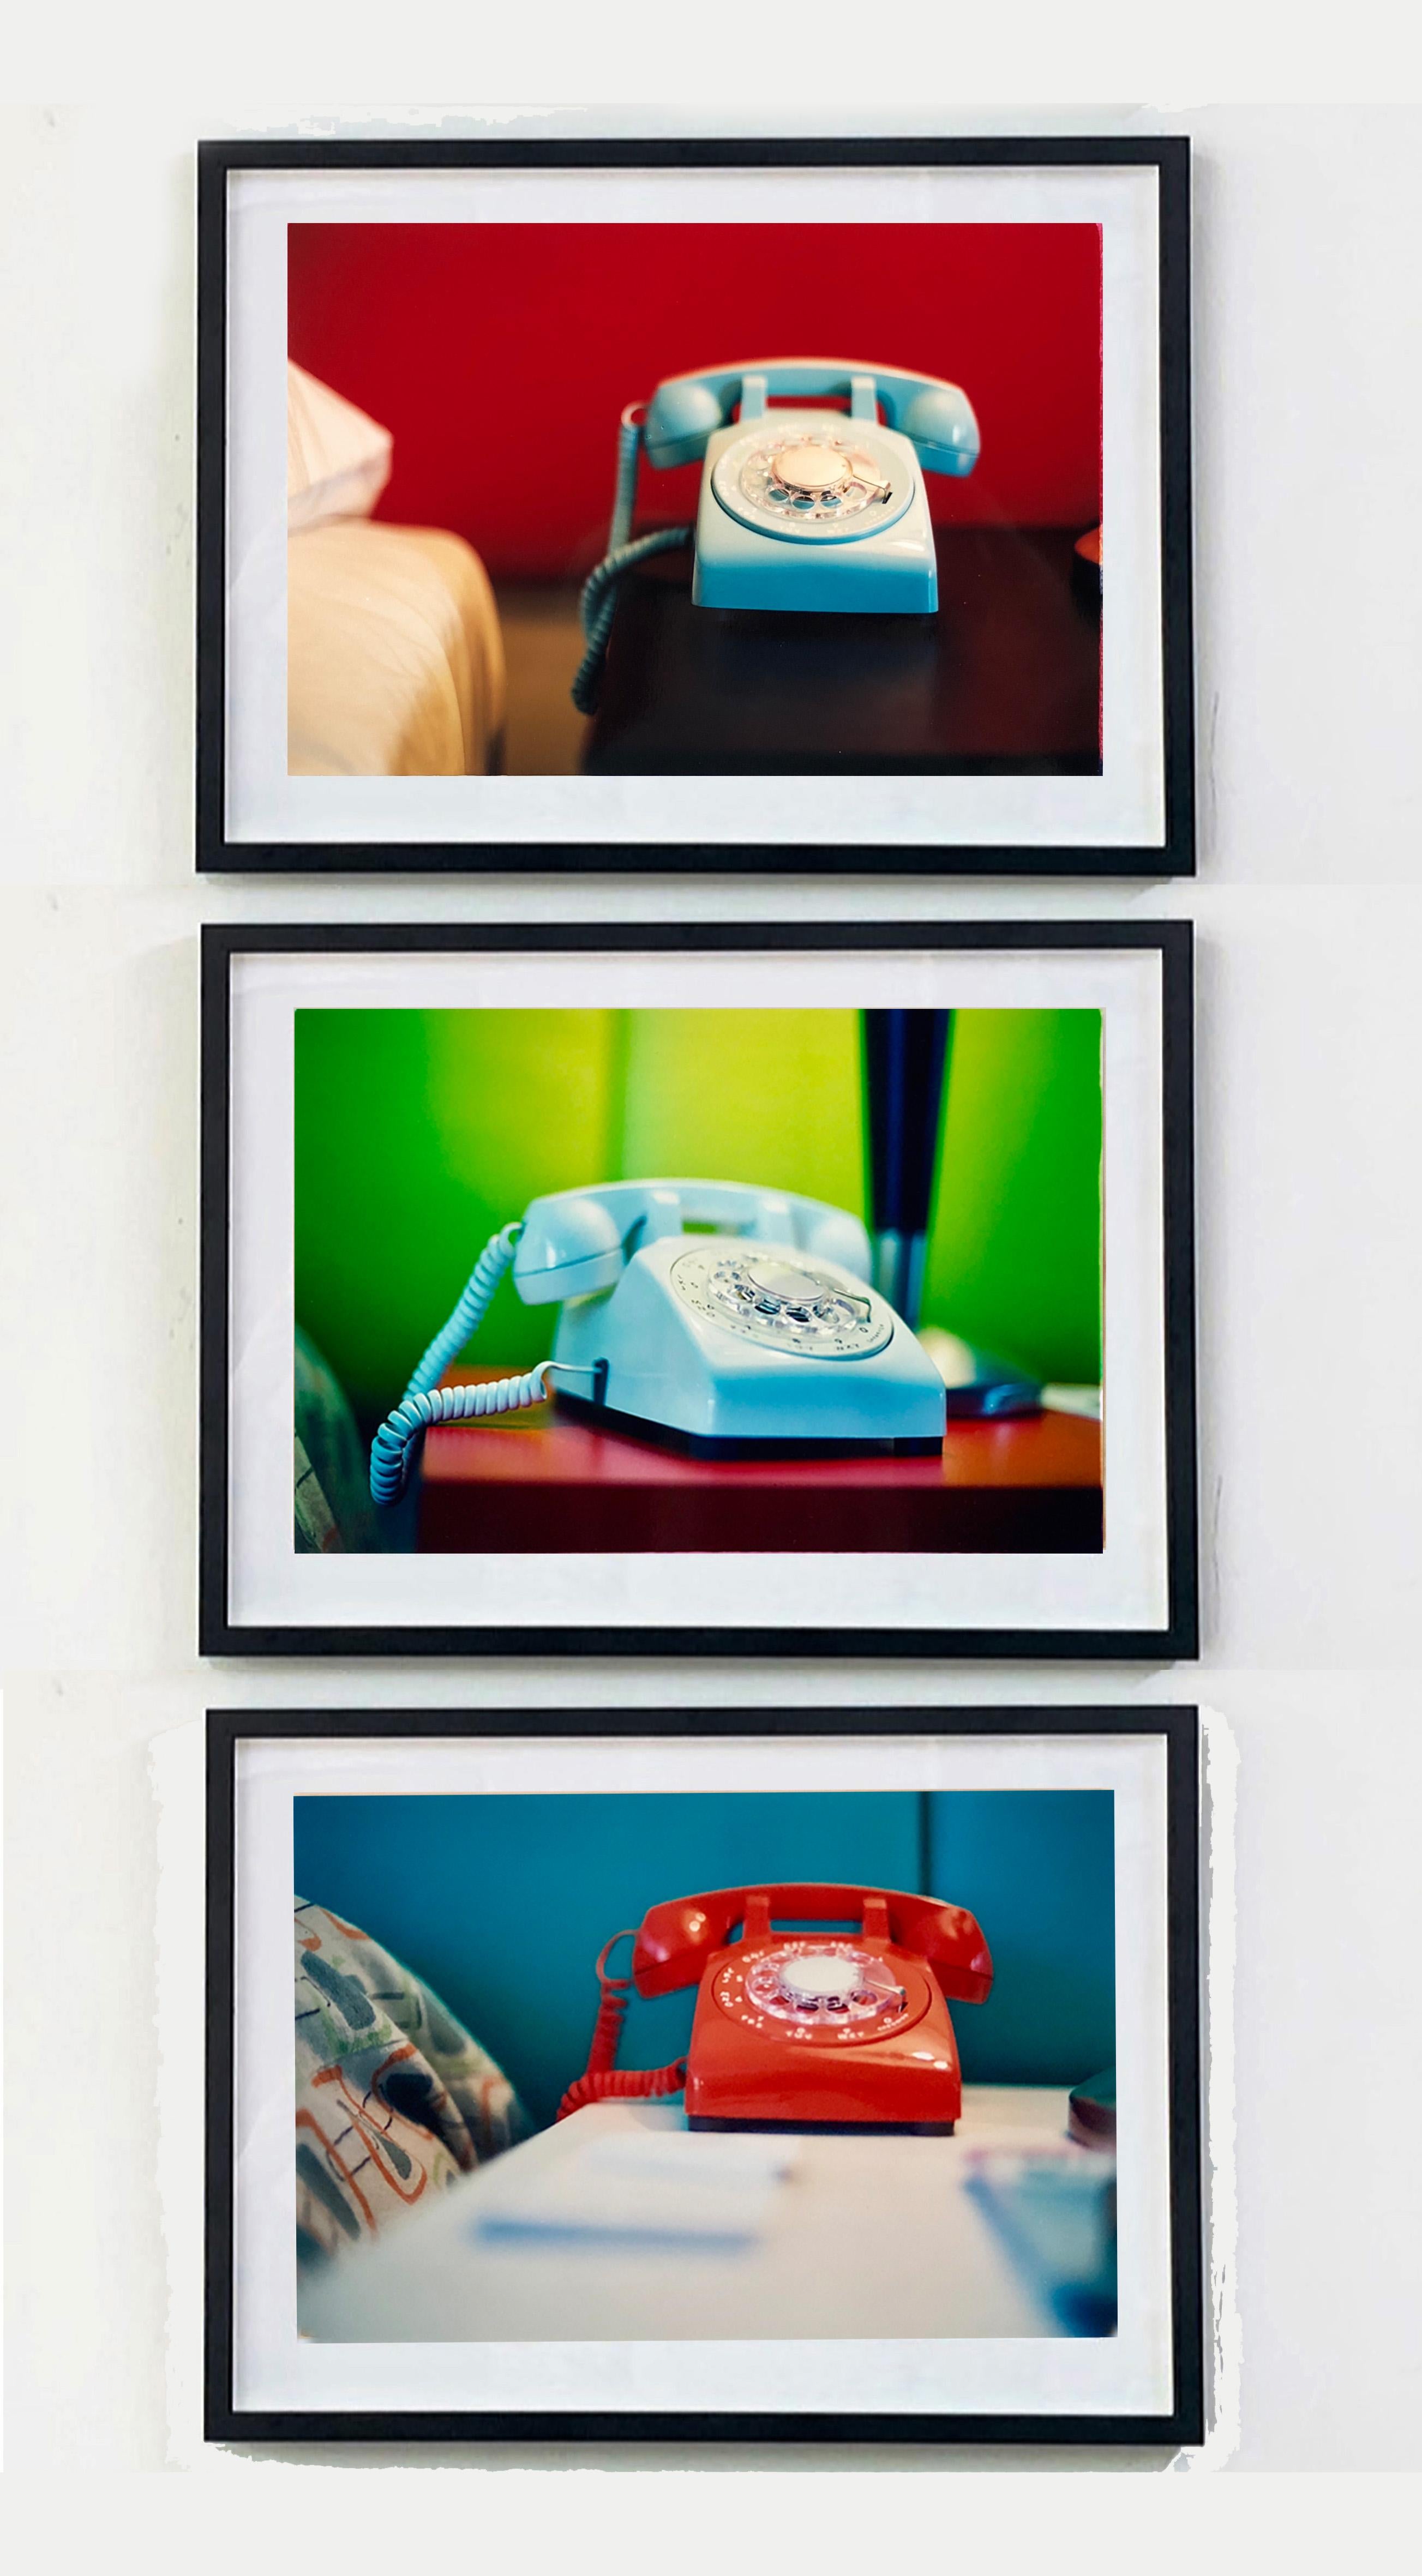 'Telephone I' part of Richard Heeps 'Dream in Colour' Series. 
This cool Palm Springs interior photography combines gorgeous colours of bold red and dreamy blue and it has a mid-century modern nostalgic vibe.

This artwork is a limited edition of